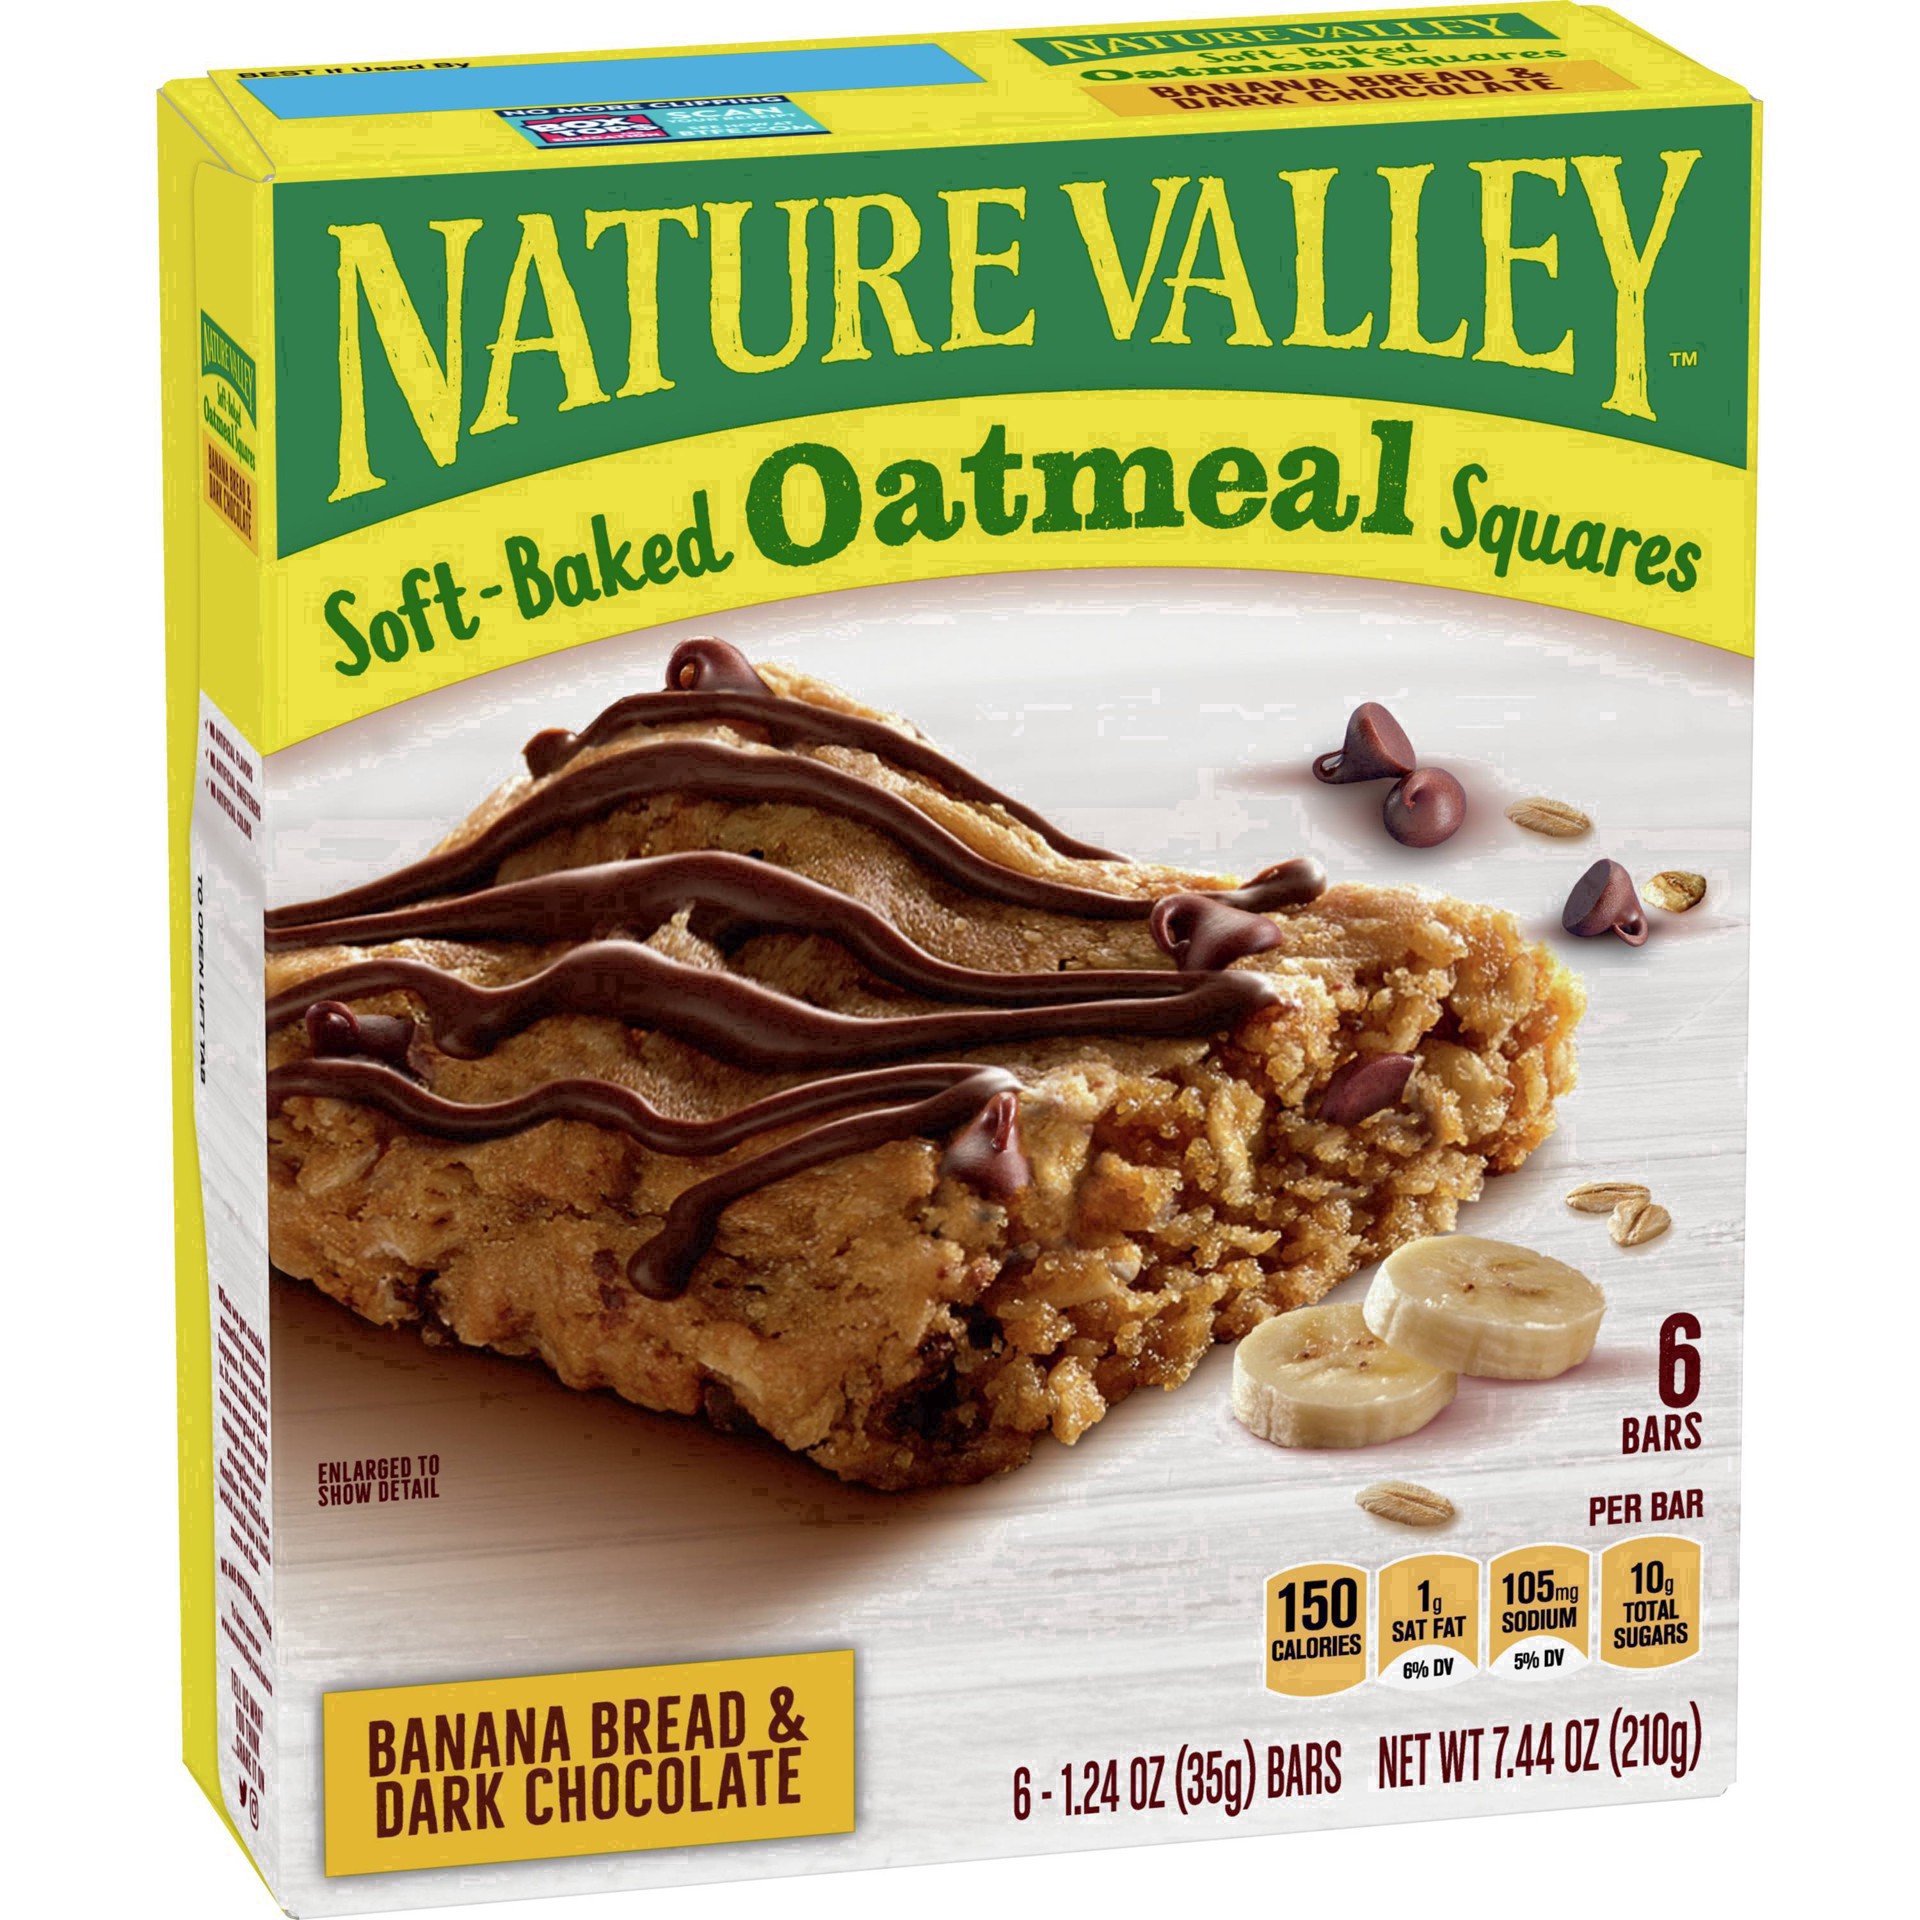 slide 64 of 101, Nature Valley Soft-Baked Oatmeal Squares, Banana Bread & Dark Chocolate, 6 ct, 6 ct